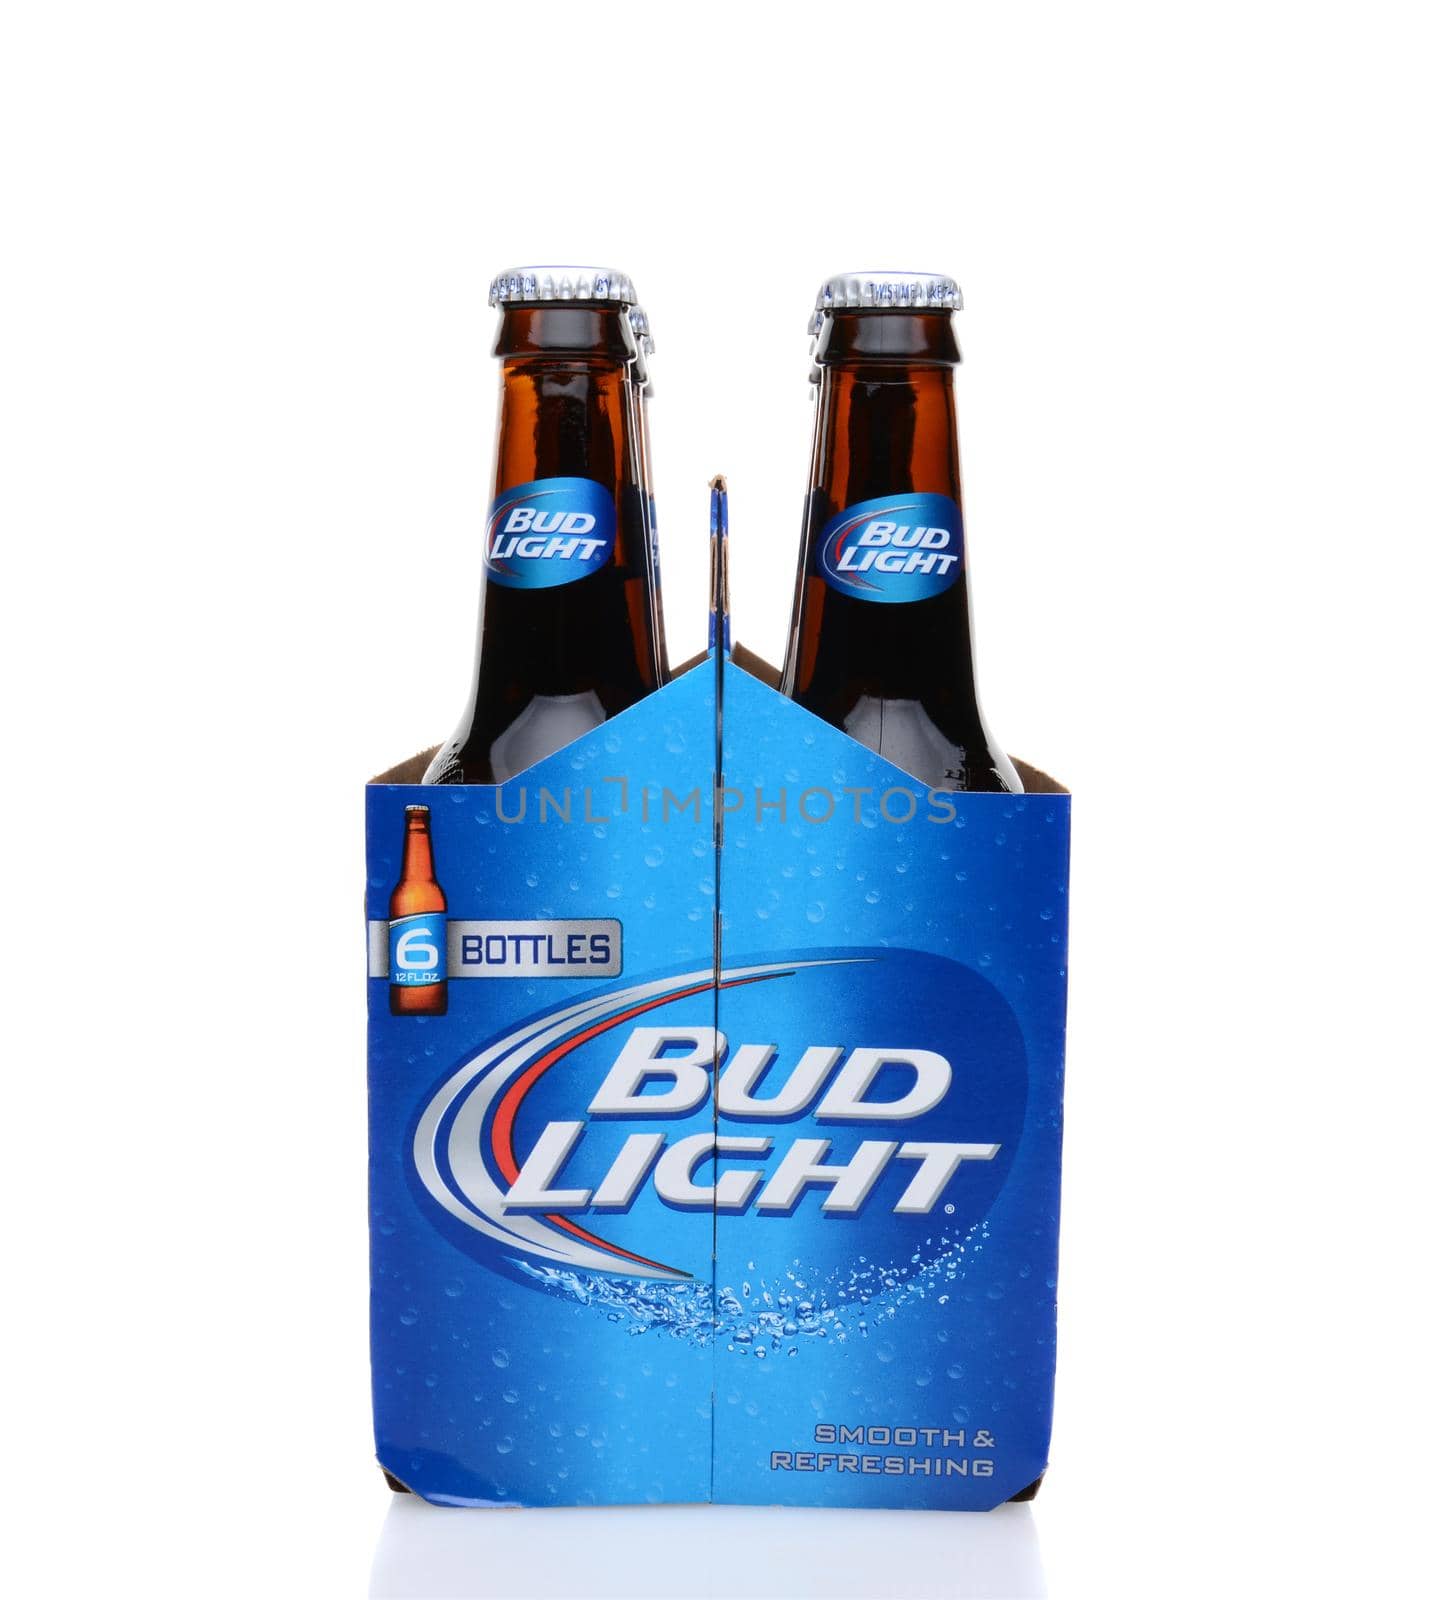 IRVINE, CA - MAY 25, 2014: A 6 pack of Bud Light beer, end view. From Anheuser-Busch InBev, Bud Light is the number selling one domestic beer in the United States.